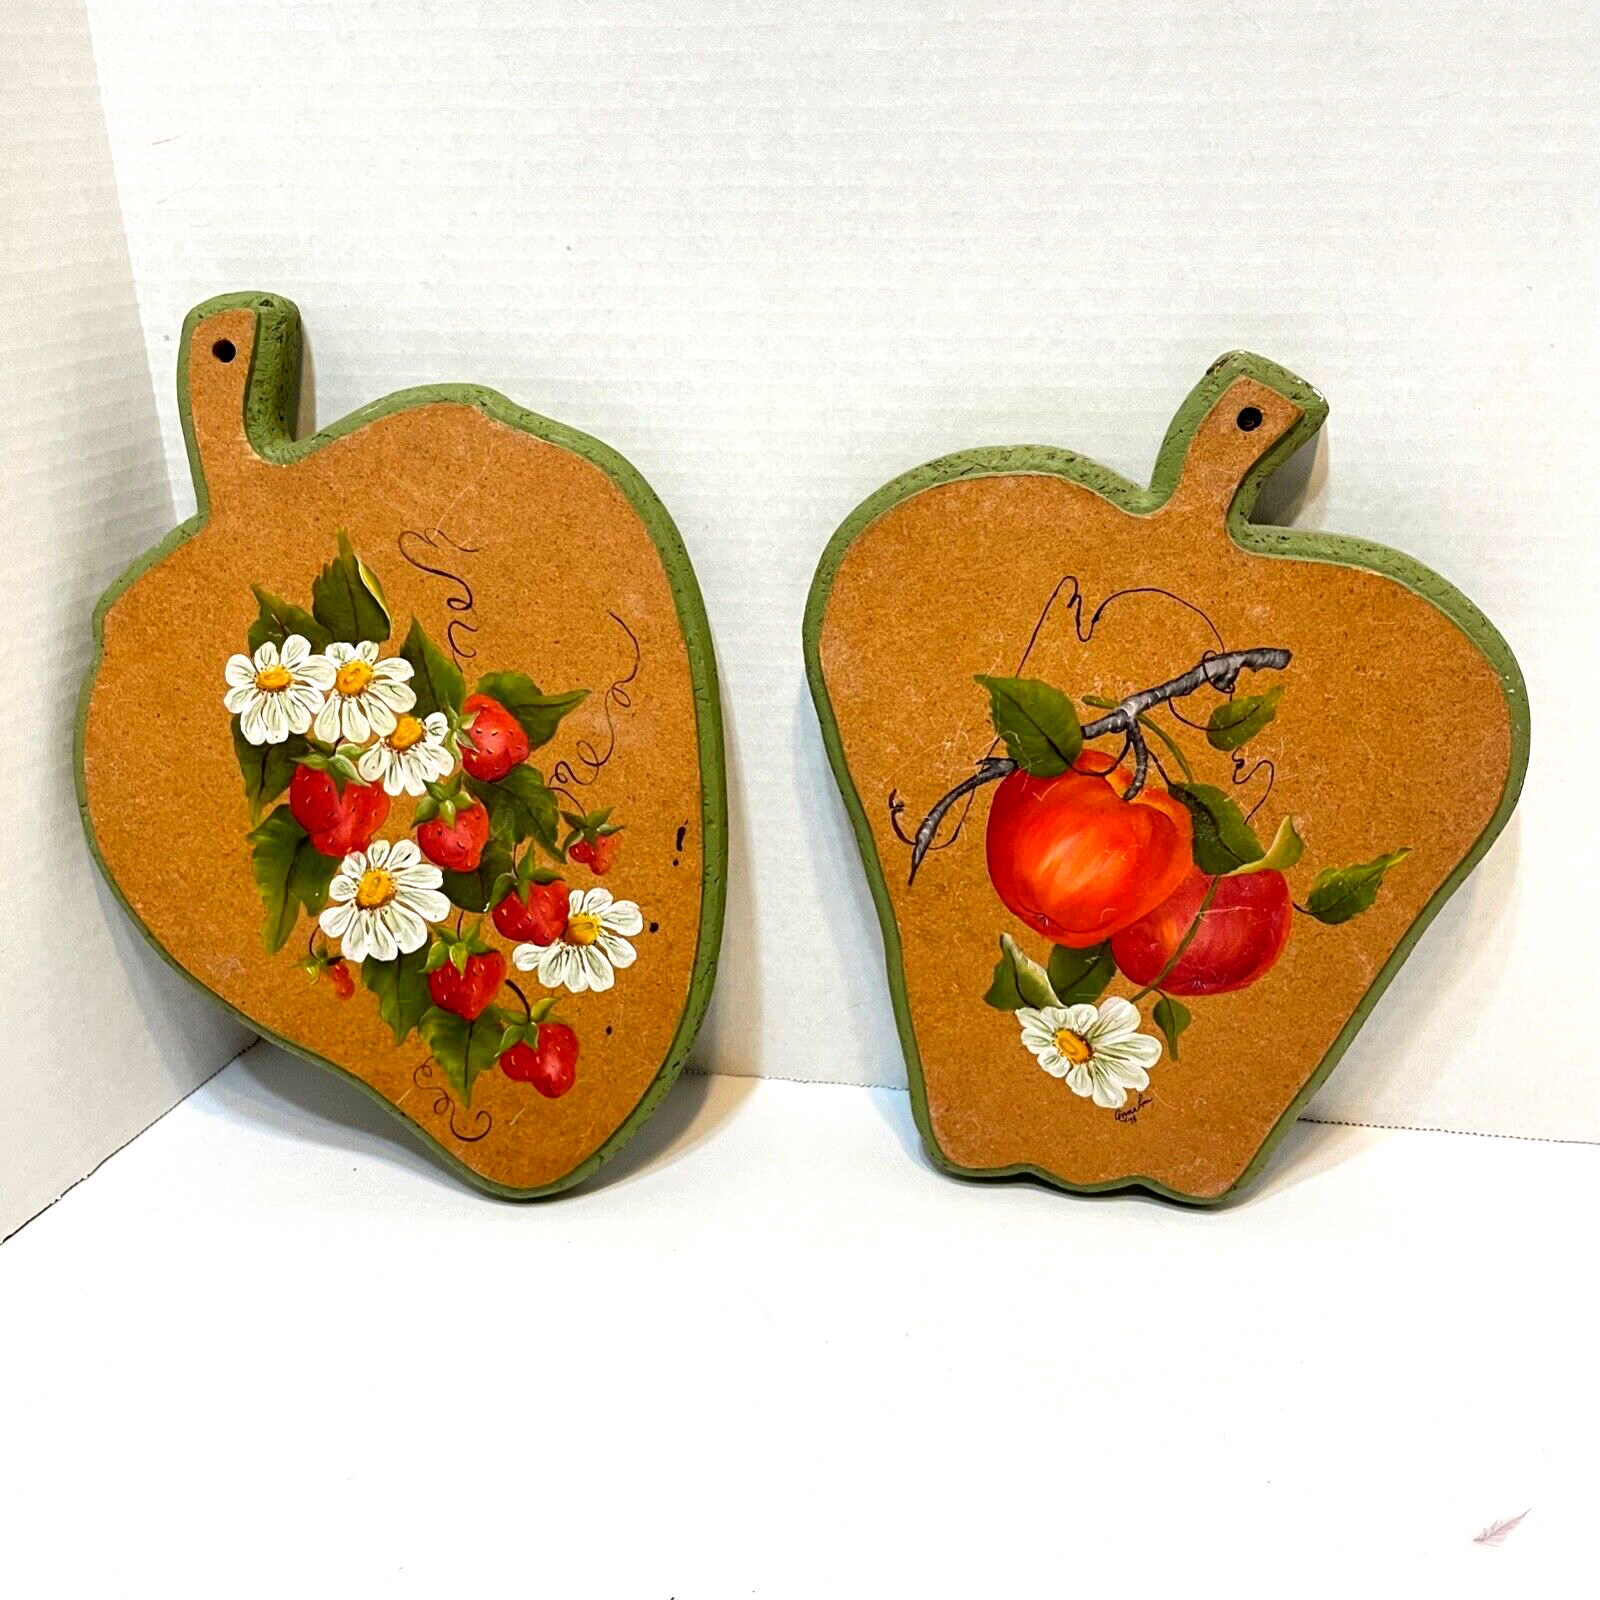 Primary image for Vintage 1976 Hand Painted Wall Plaques Decor Signed Strawberries Apples Lot 2